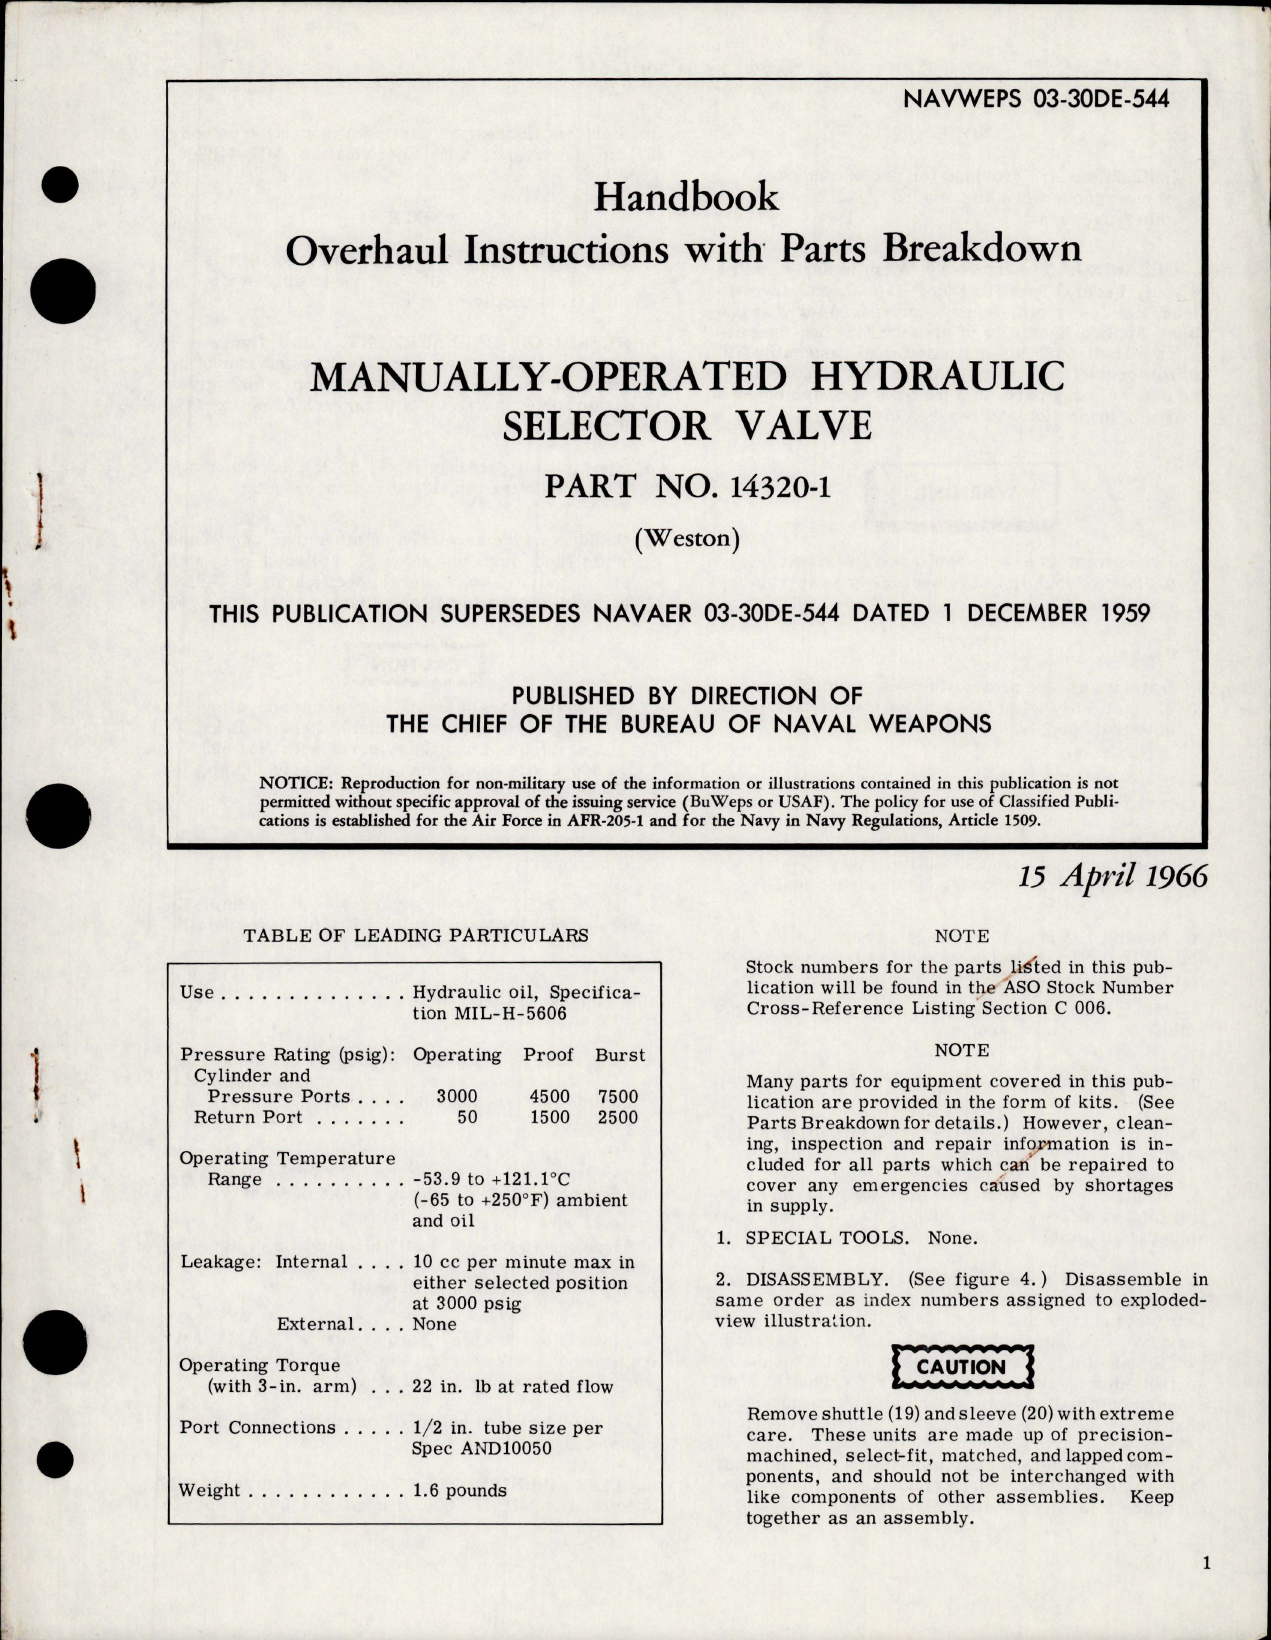 Sample page 1 from AirCorps Library document: Overhaul Instructions with Parts Breakdown for Manually Operated Hydraulic Selector Valve - Part 14320-1